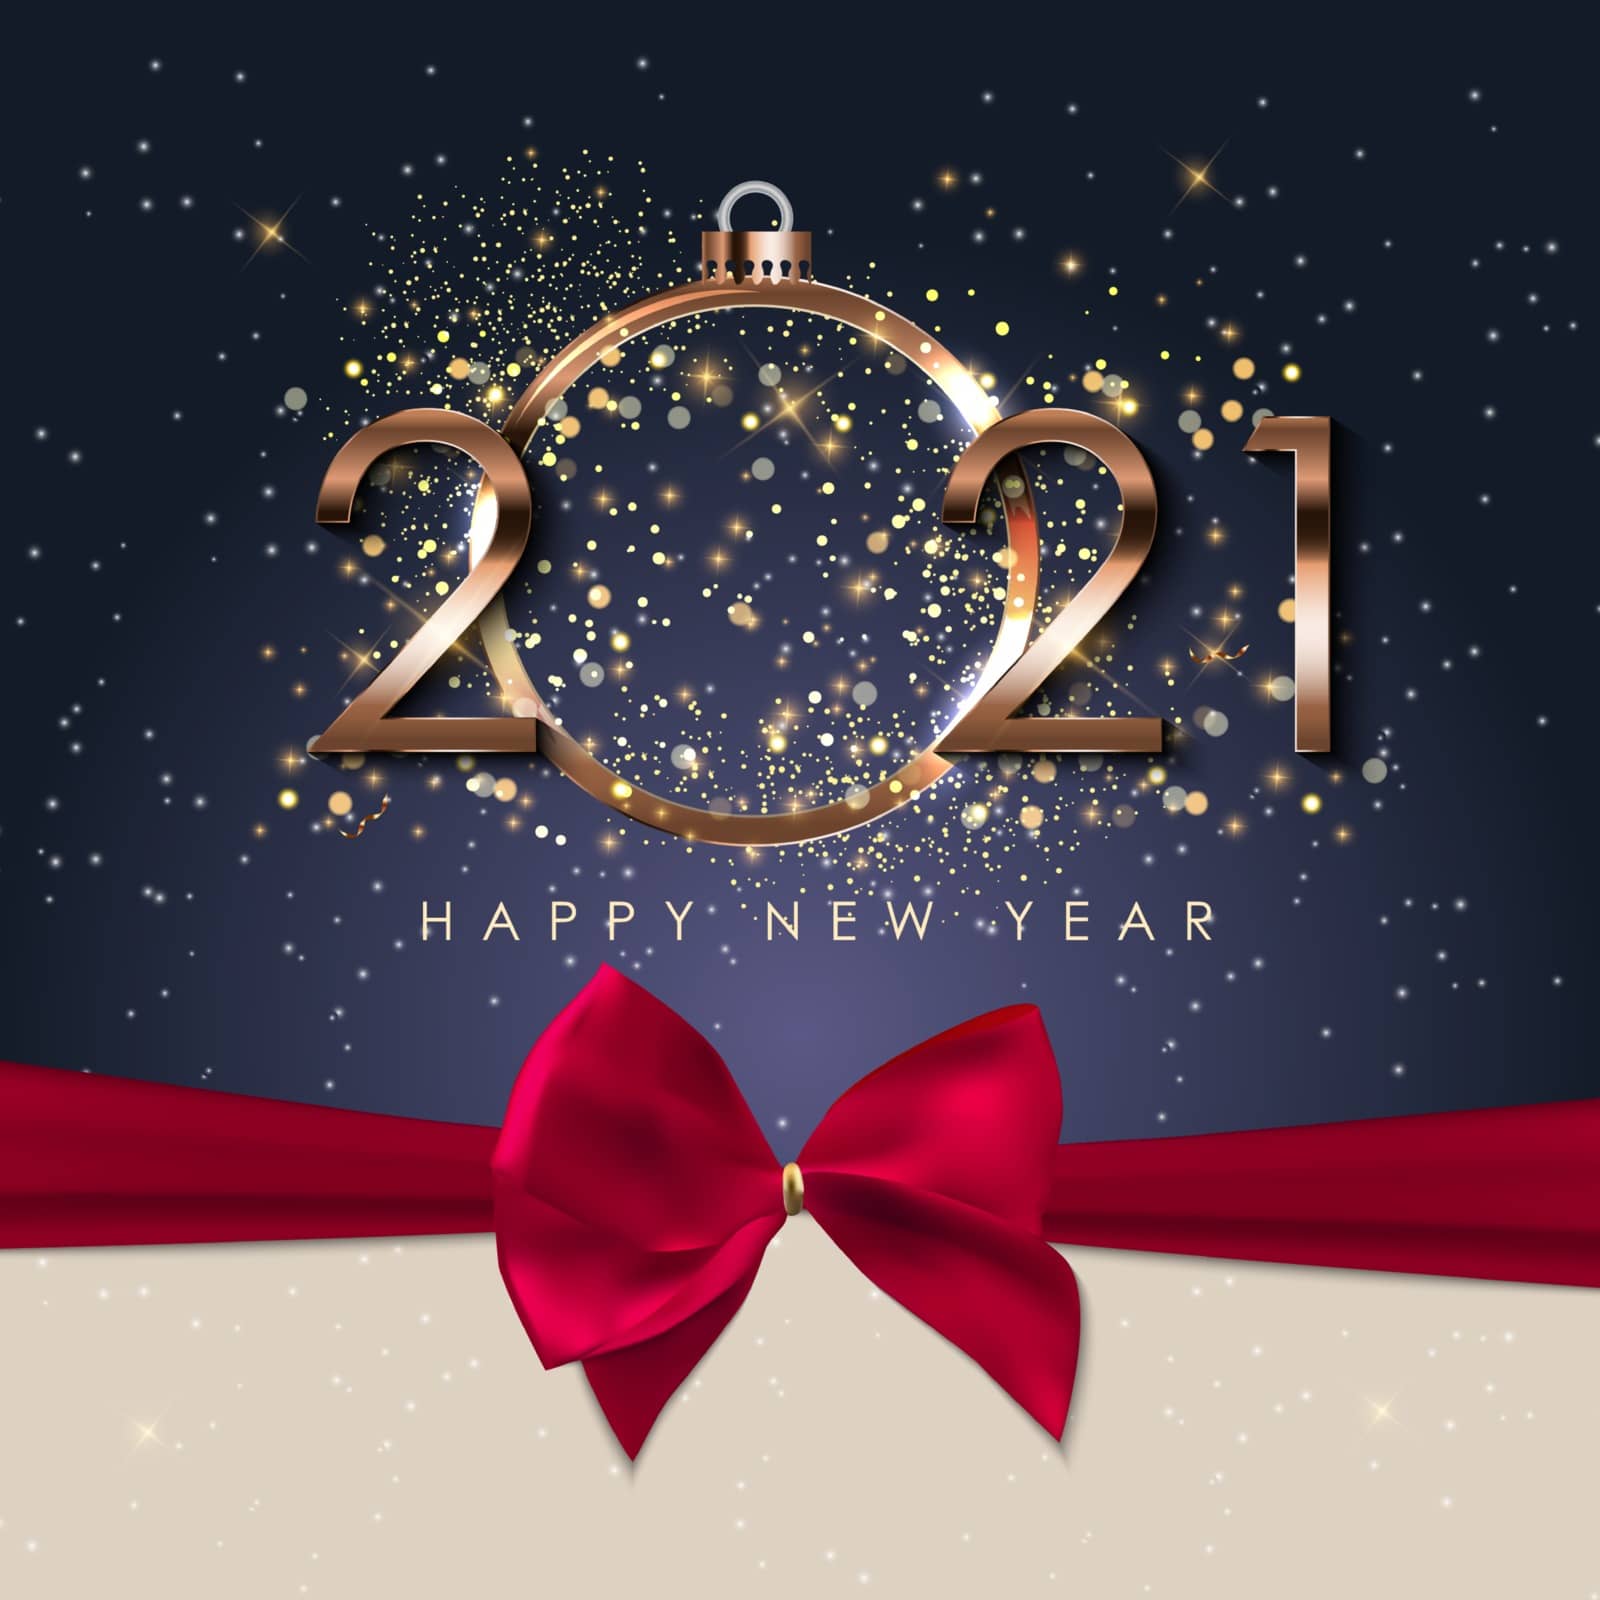 Happy New Year 2021 Holiday Background Template. Vector Illustration by yganko